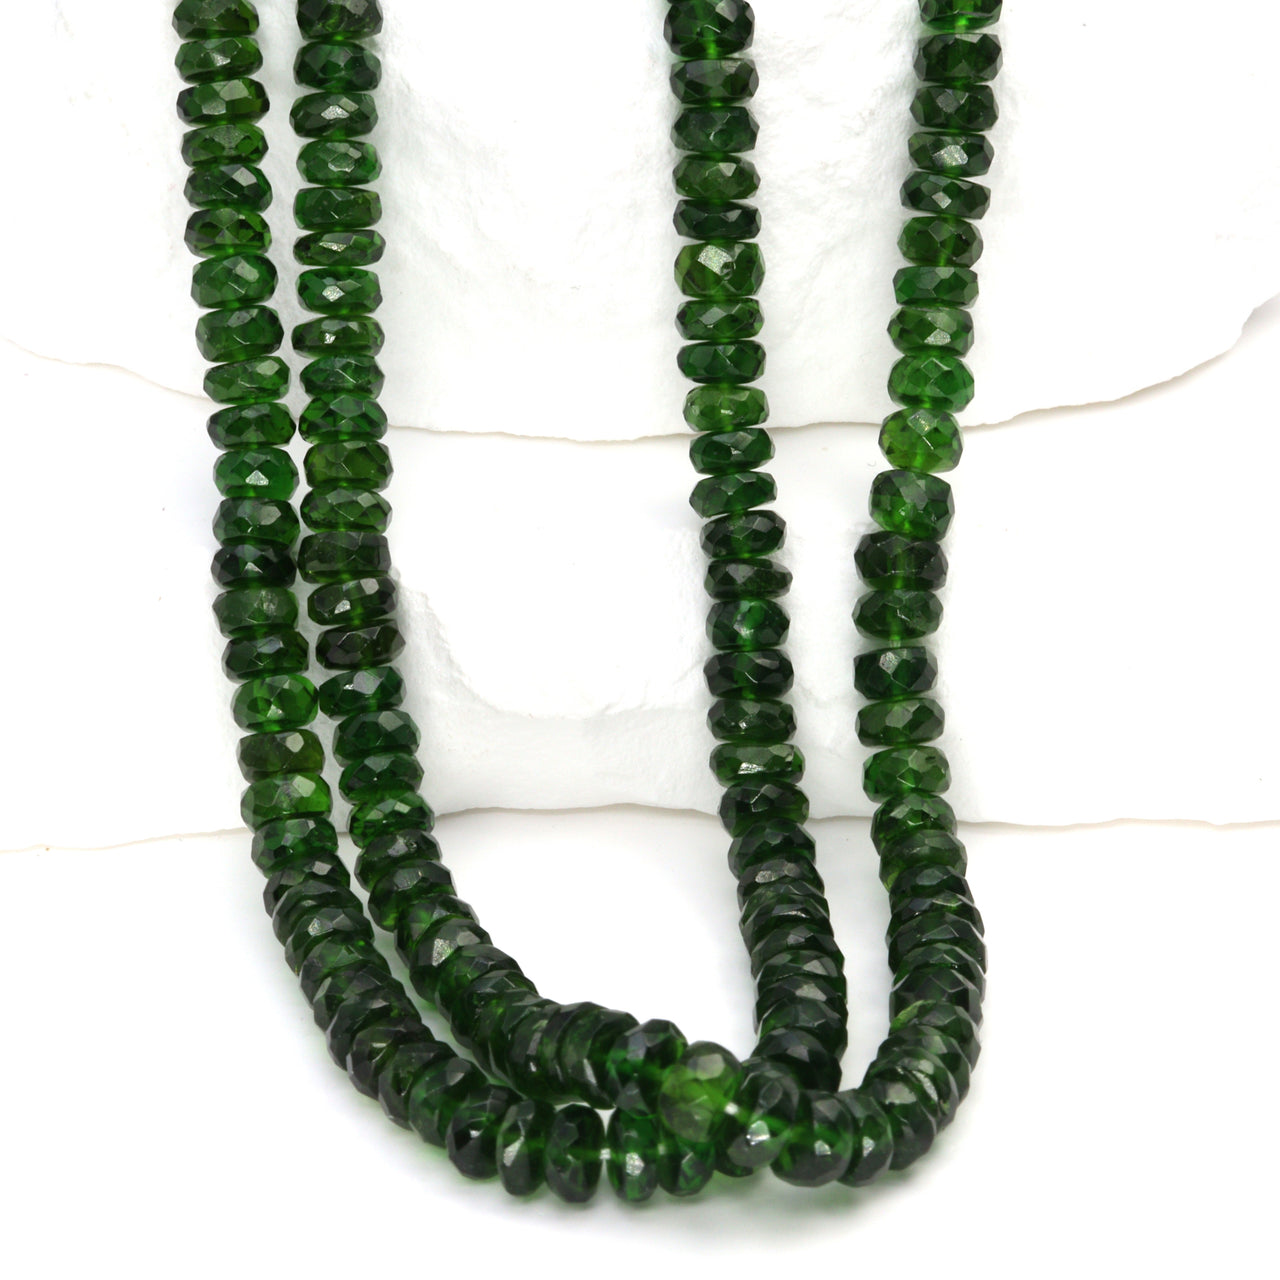 Green Chrome Diopside 5mm Faceted Rondelles